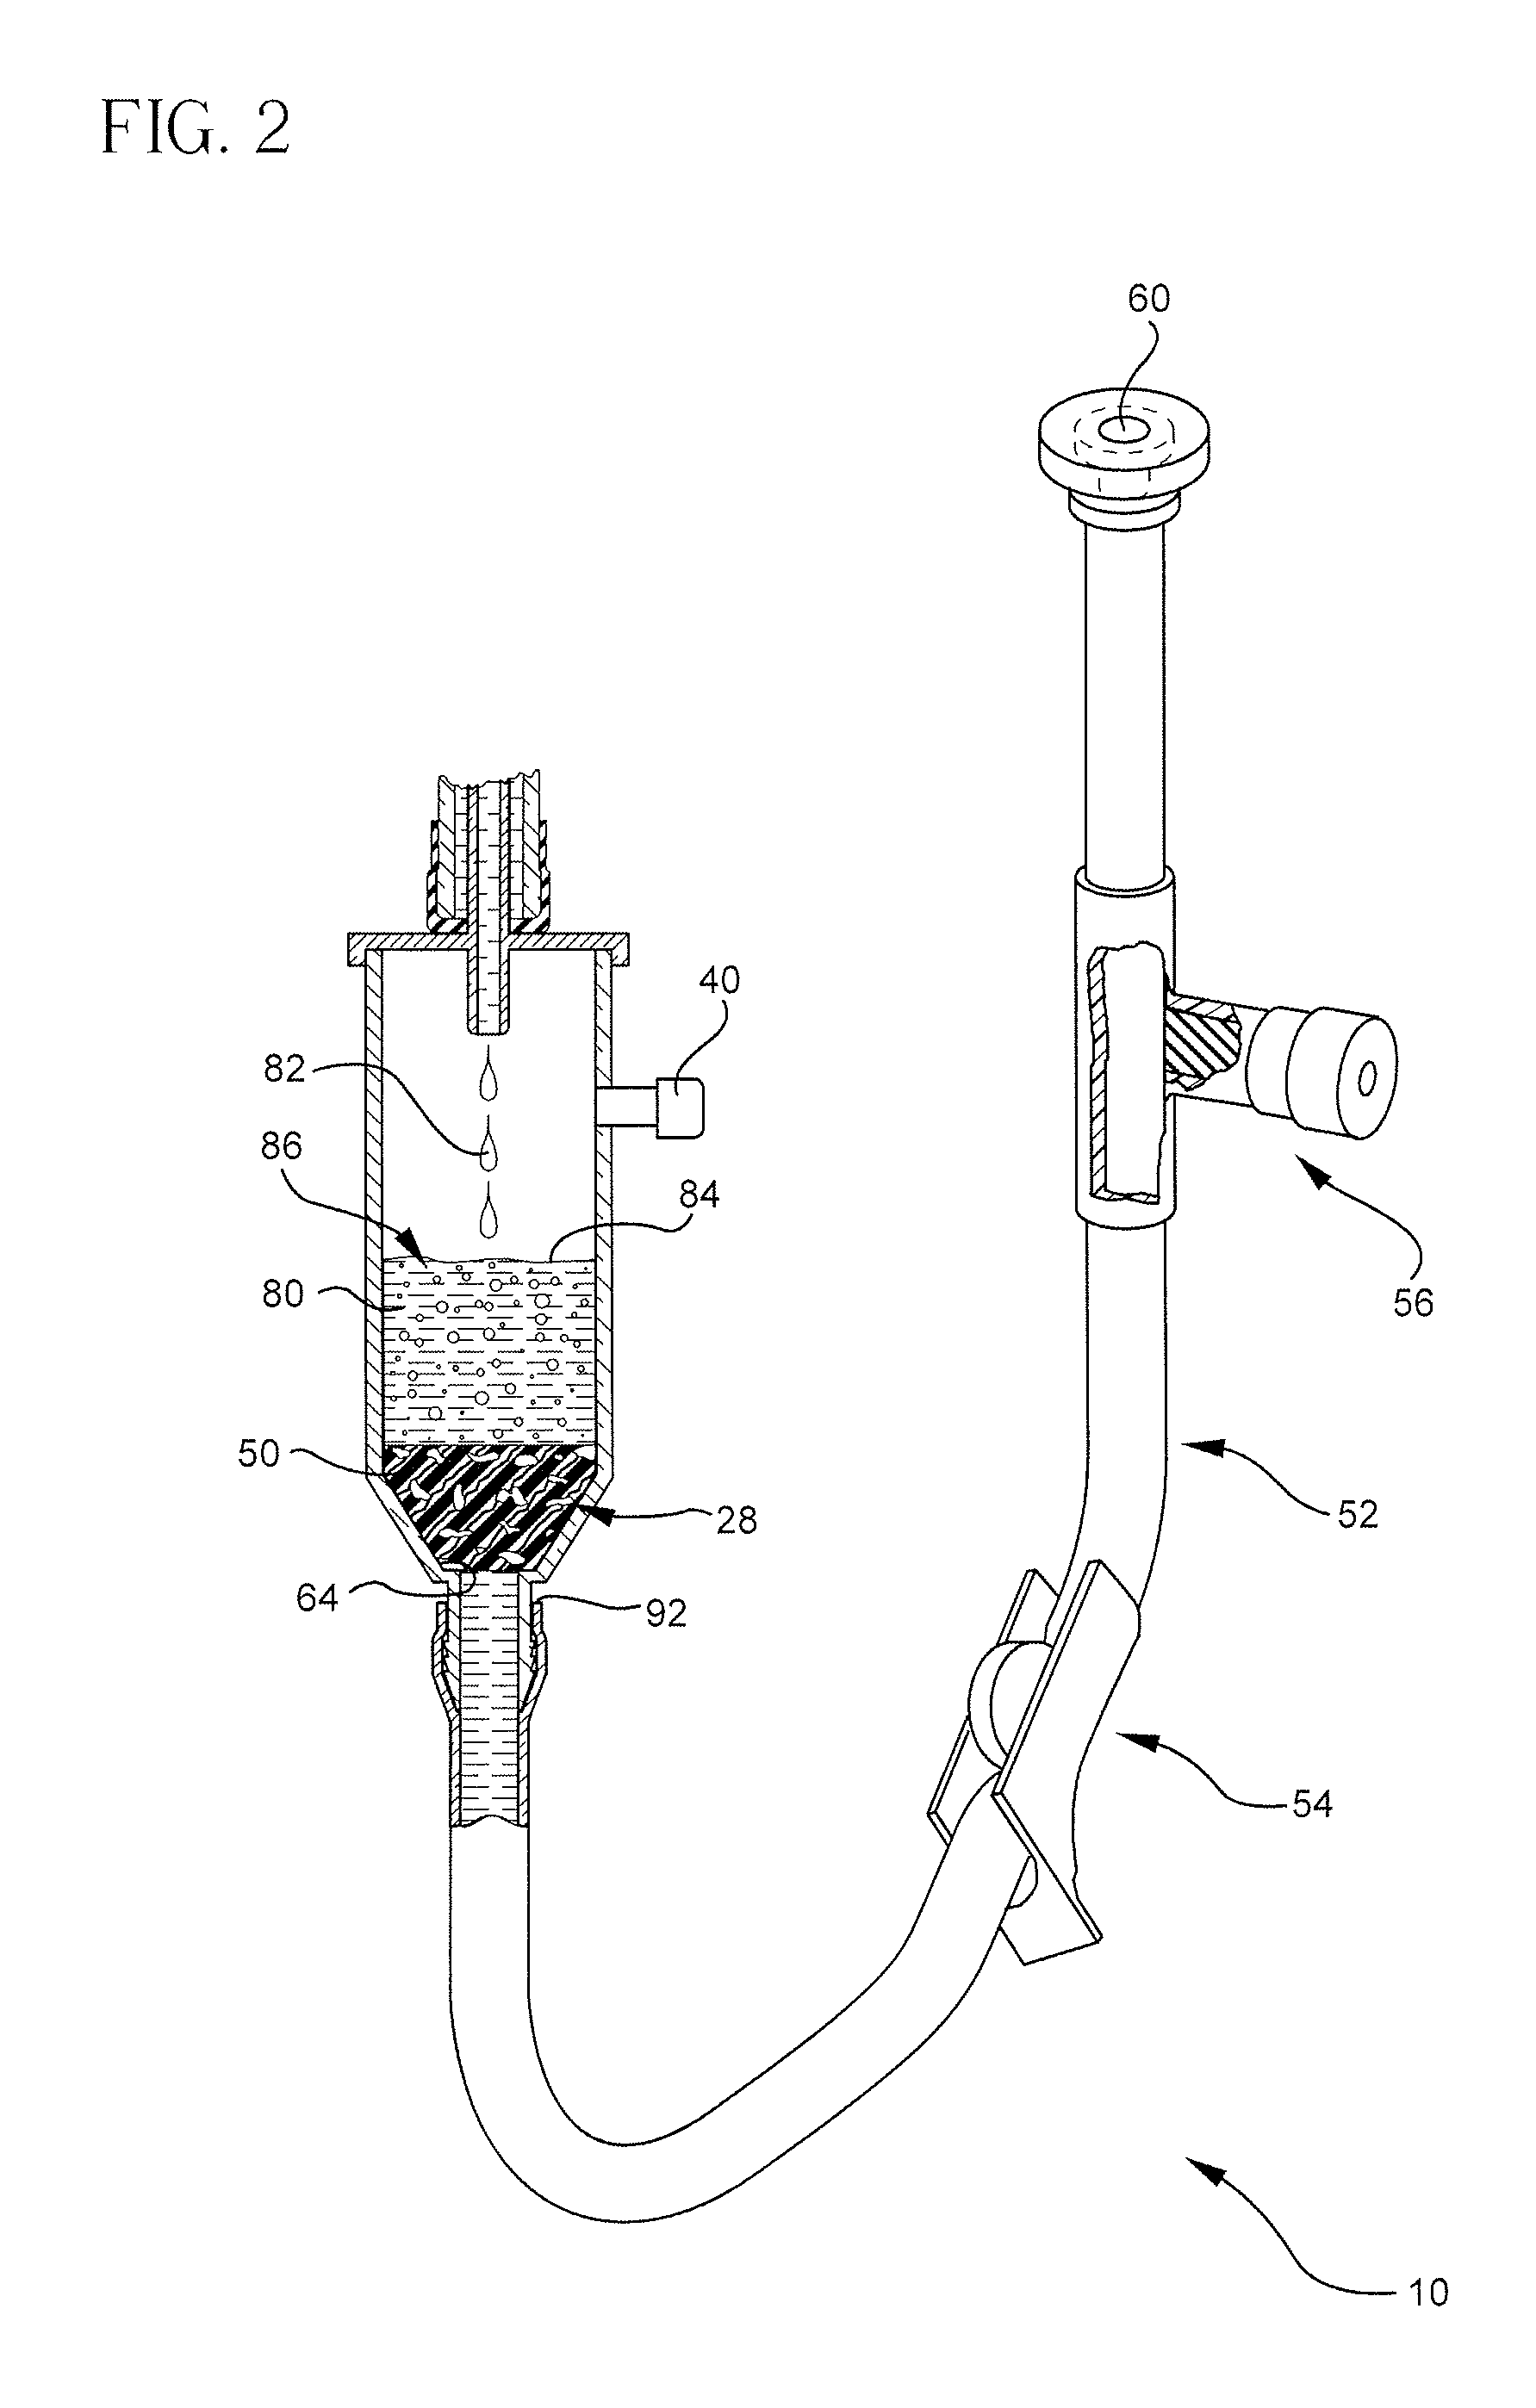 Self priming intravenous delivery system